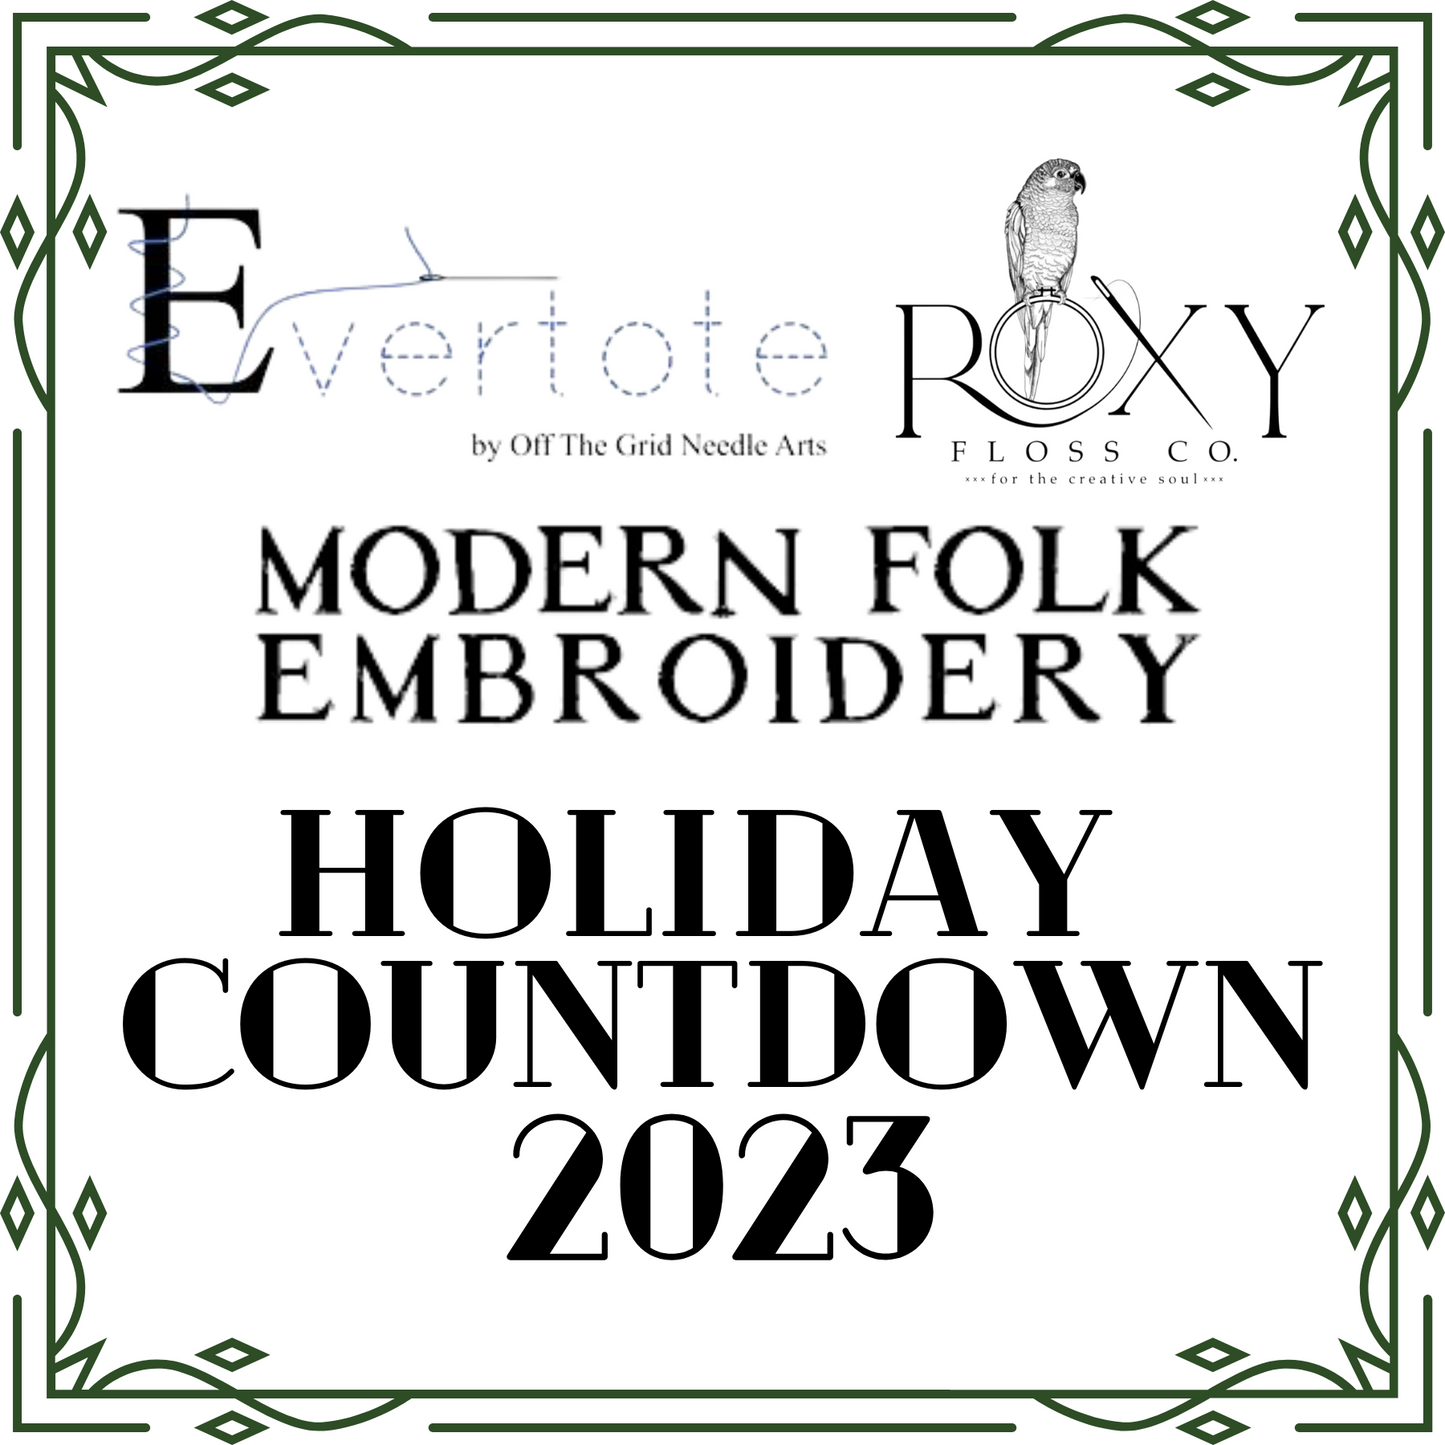 Evertote, Modern Folk Embroidery, and Roxy Floss Co. Holiday Countdown 2023